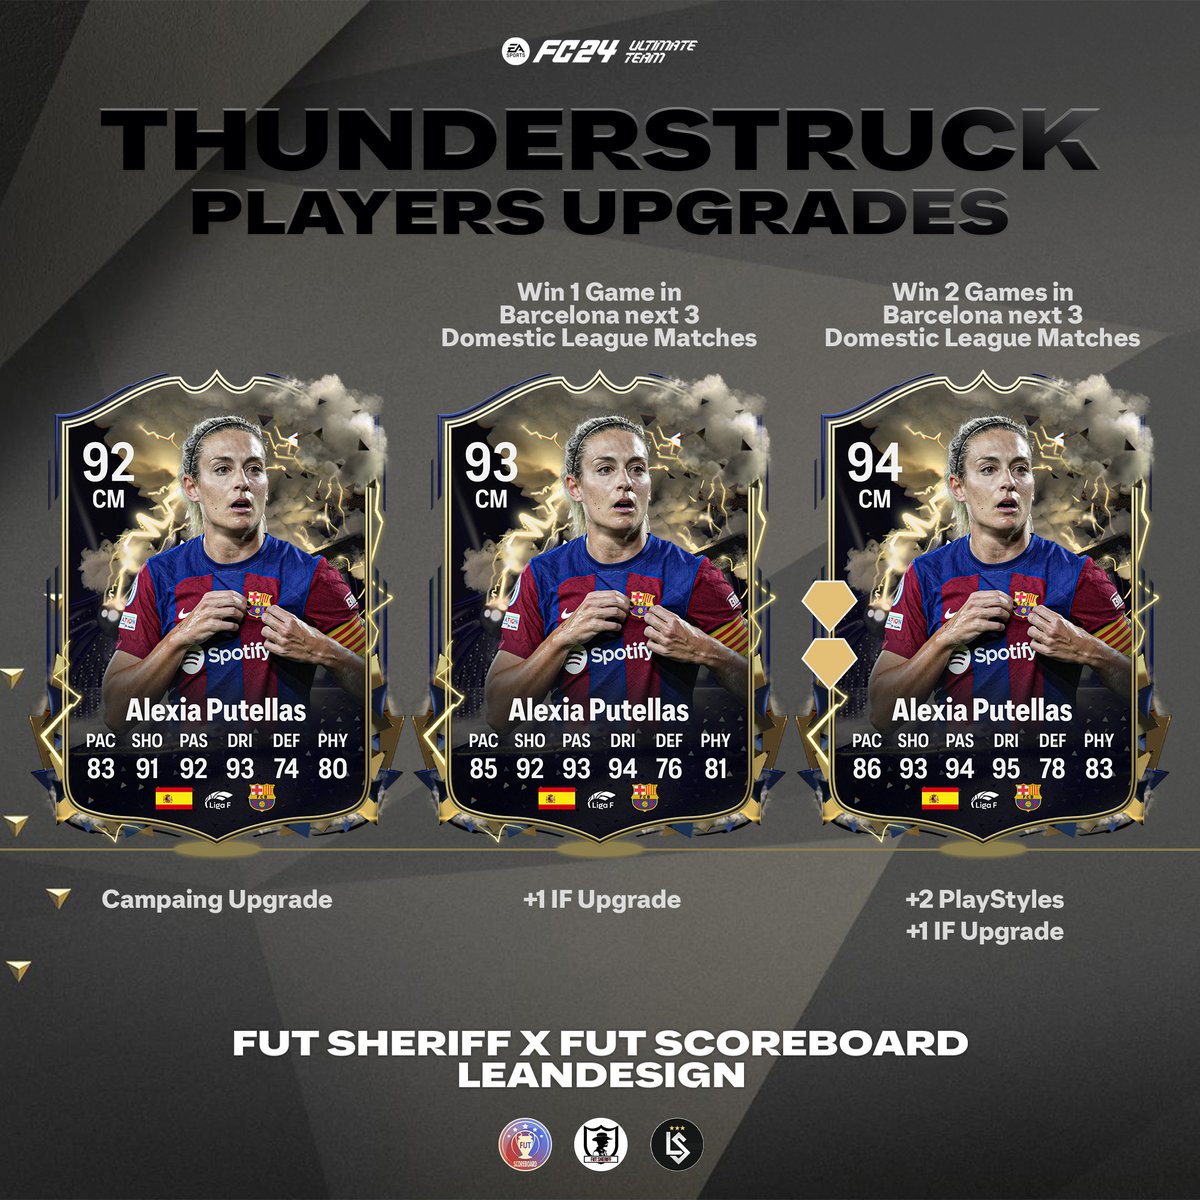 Fut Sheriff on X: 🚨Cantona 🇫🇷 is coming as THUNDERSTRUCK ICON player  soon!🔥 He will be based on Man. Utd performances! Make sure to follow  @FutSheriff @Fut_scoreboard @LeanDesign_ ! #fc24  /